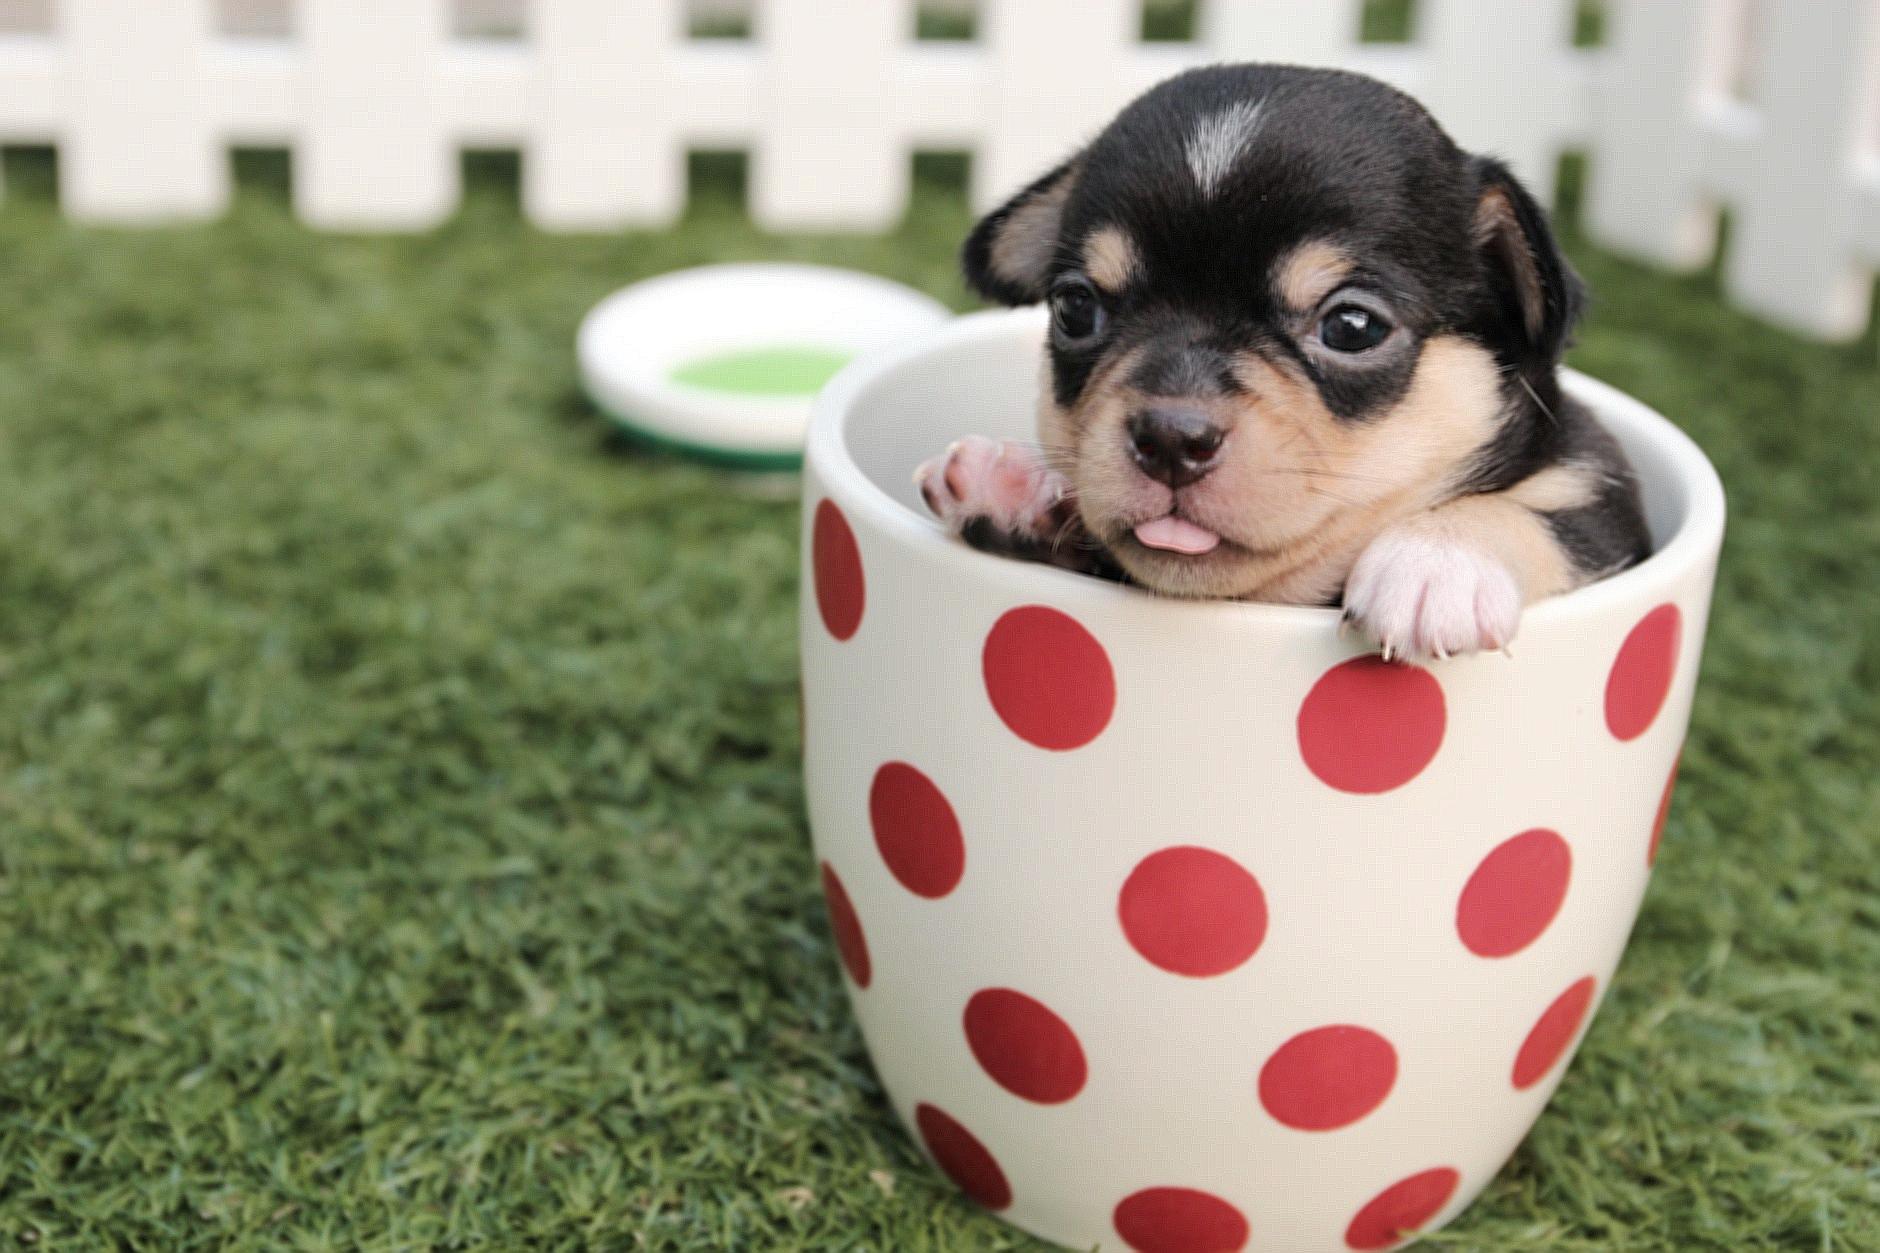 Short-coated Black and Brown Puppy in White And Red Polka-dot Ceramic Mug on Green Field